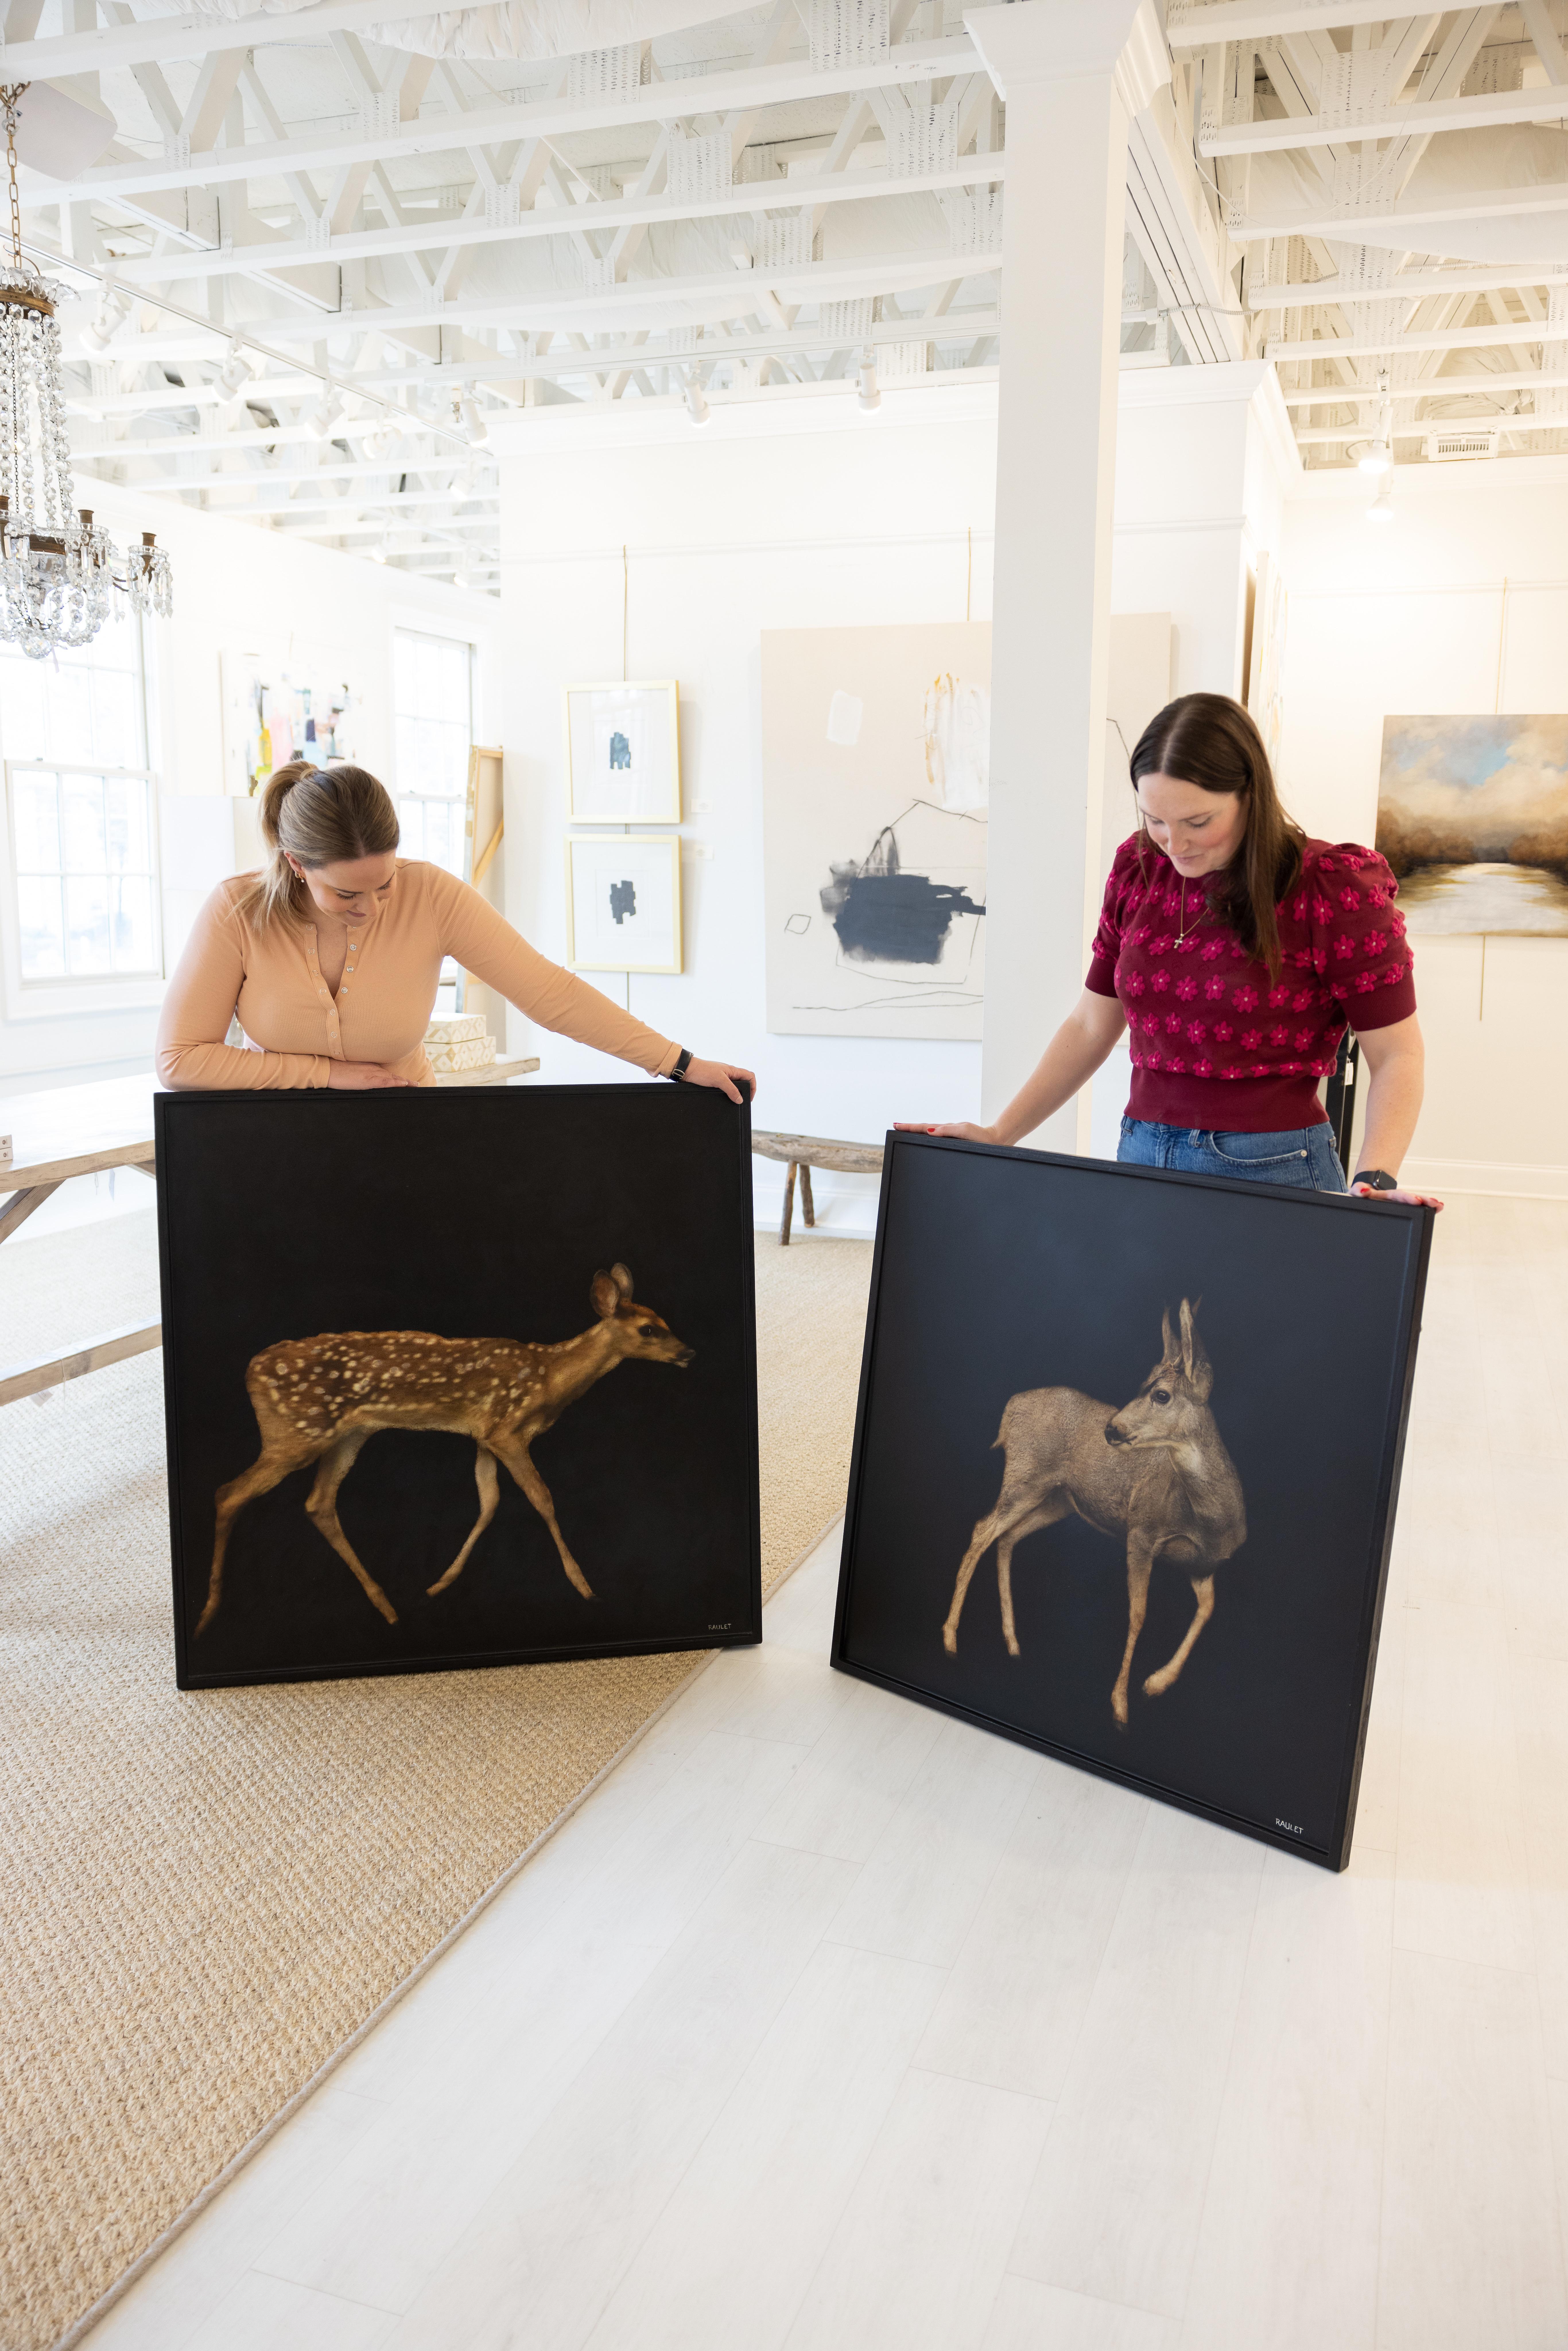 Fawning for You by Dawne Raulet Contemporary Animal Mixed Media with Black Deer For Sale 1